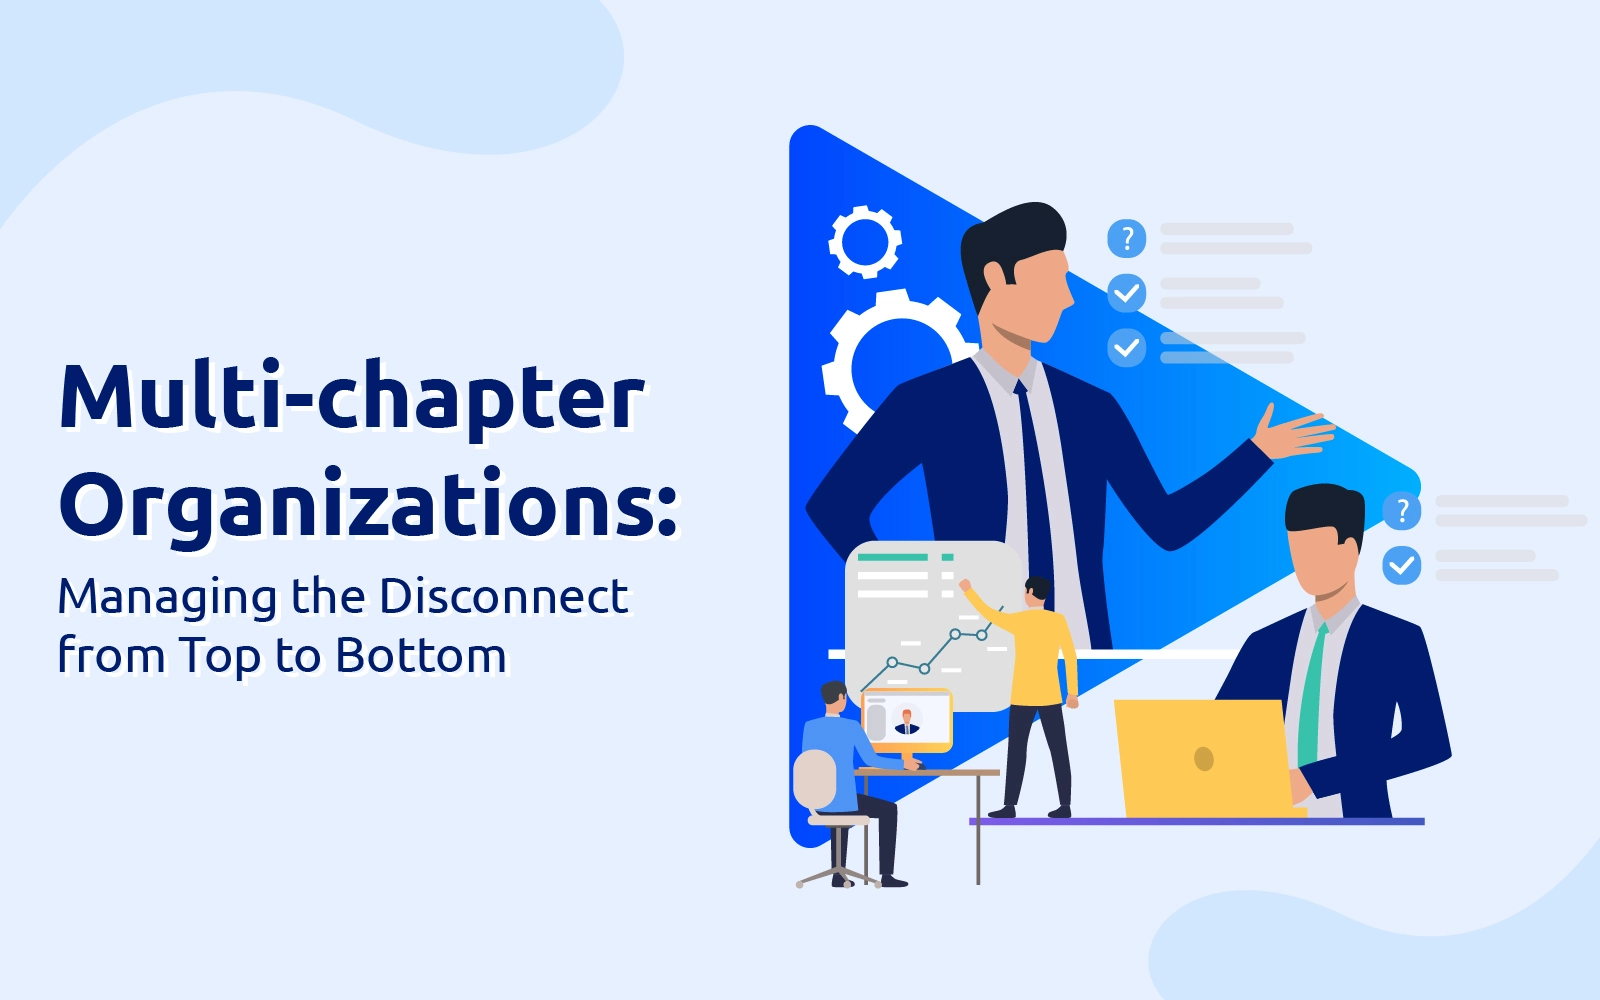 Multi-chapter Organizations: Managing the Disconnect from Top to Bottom